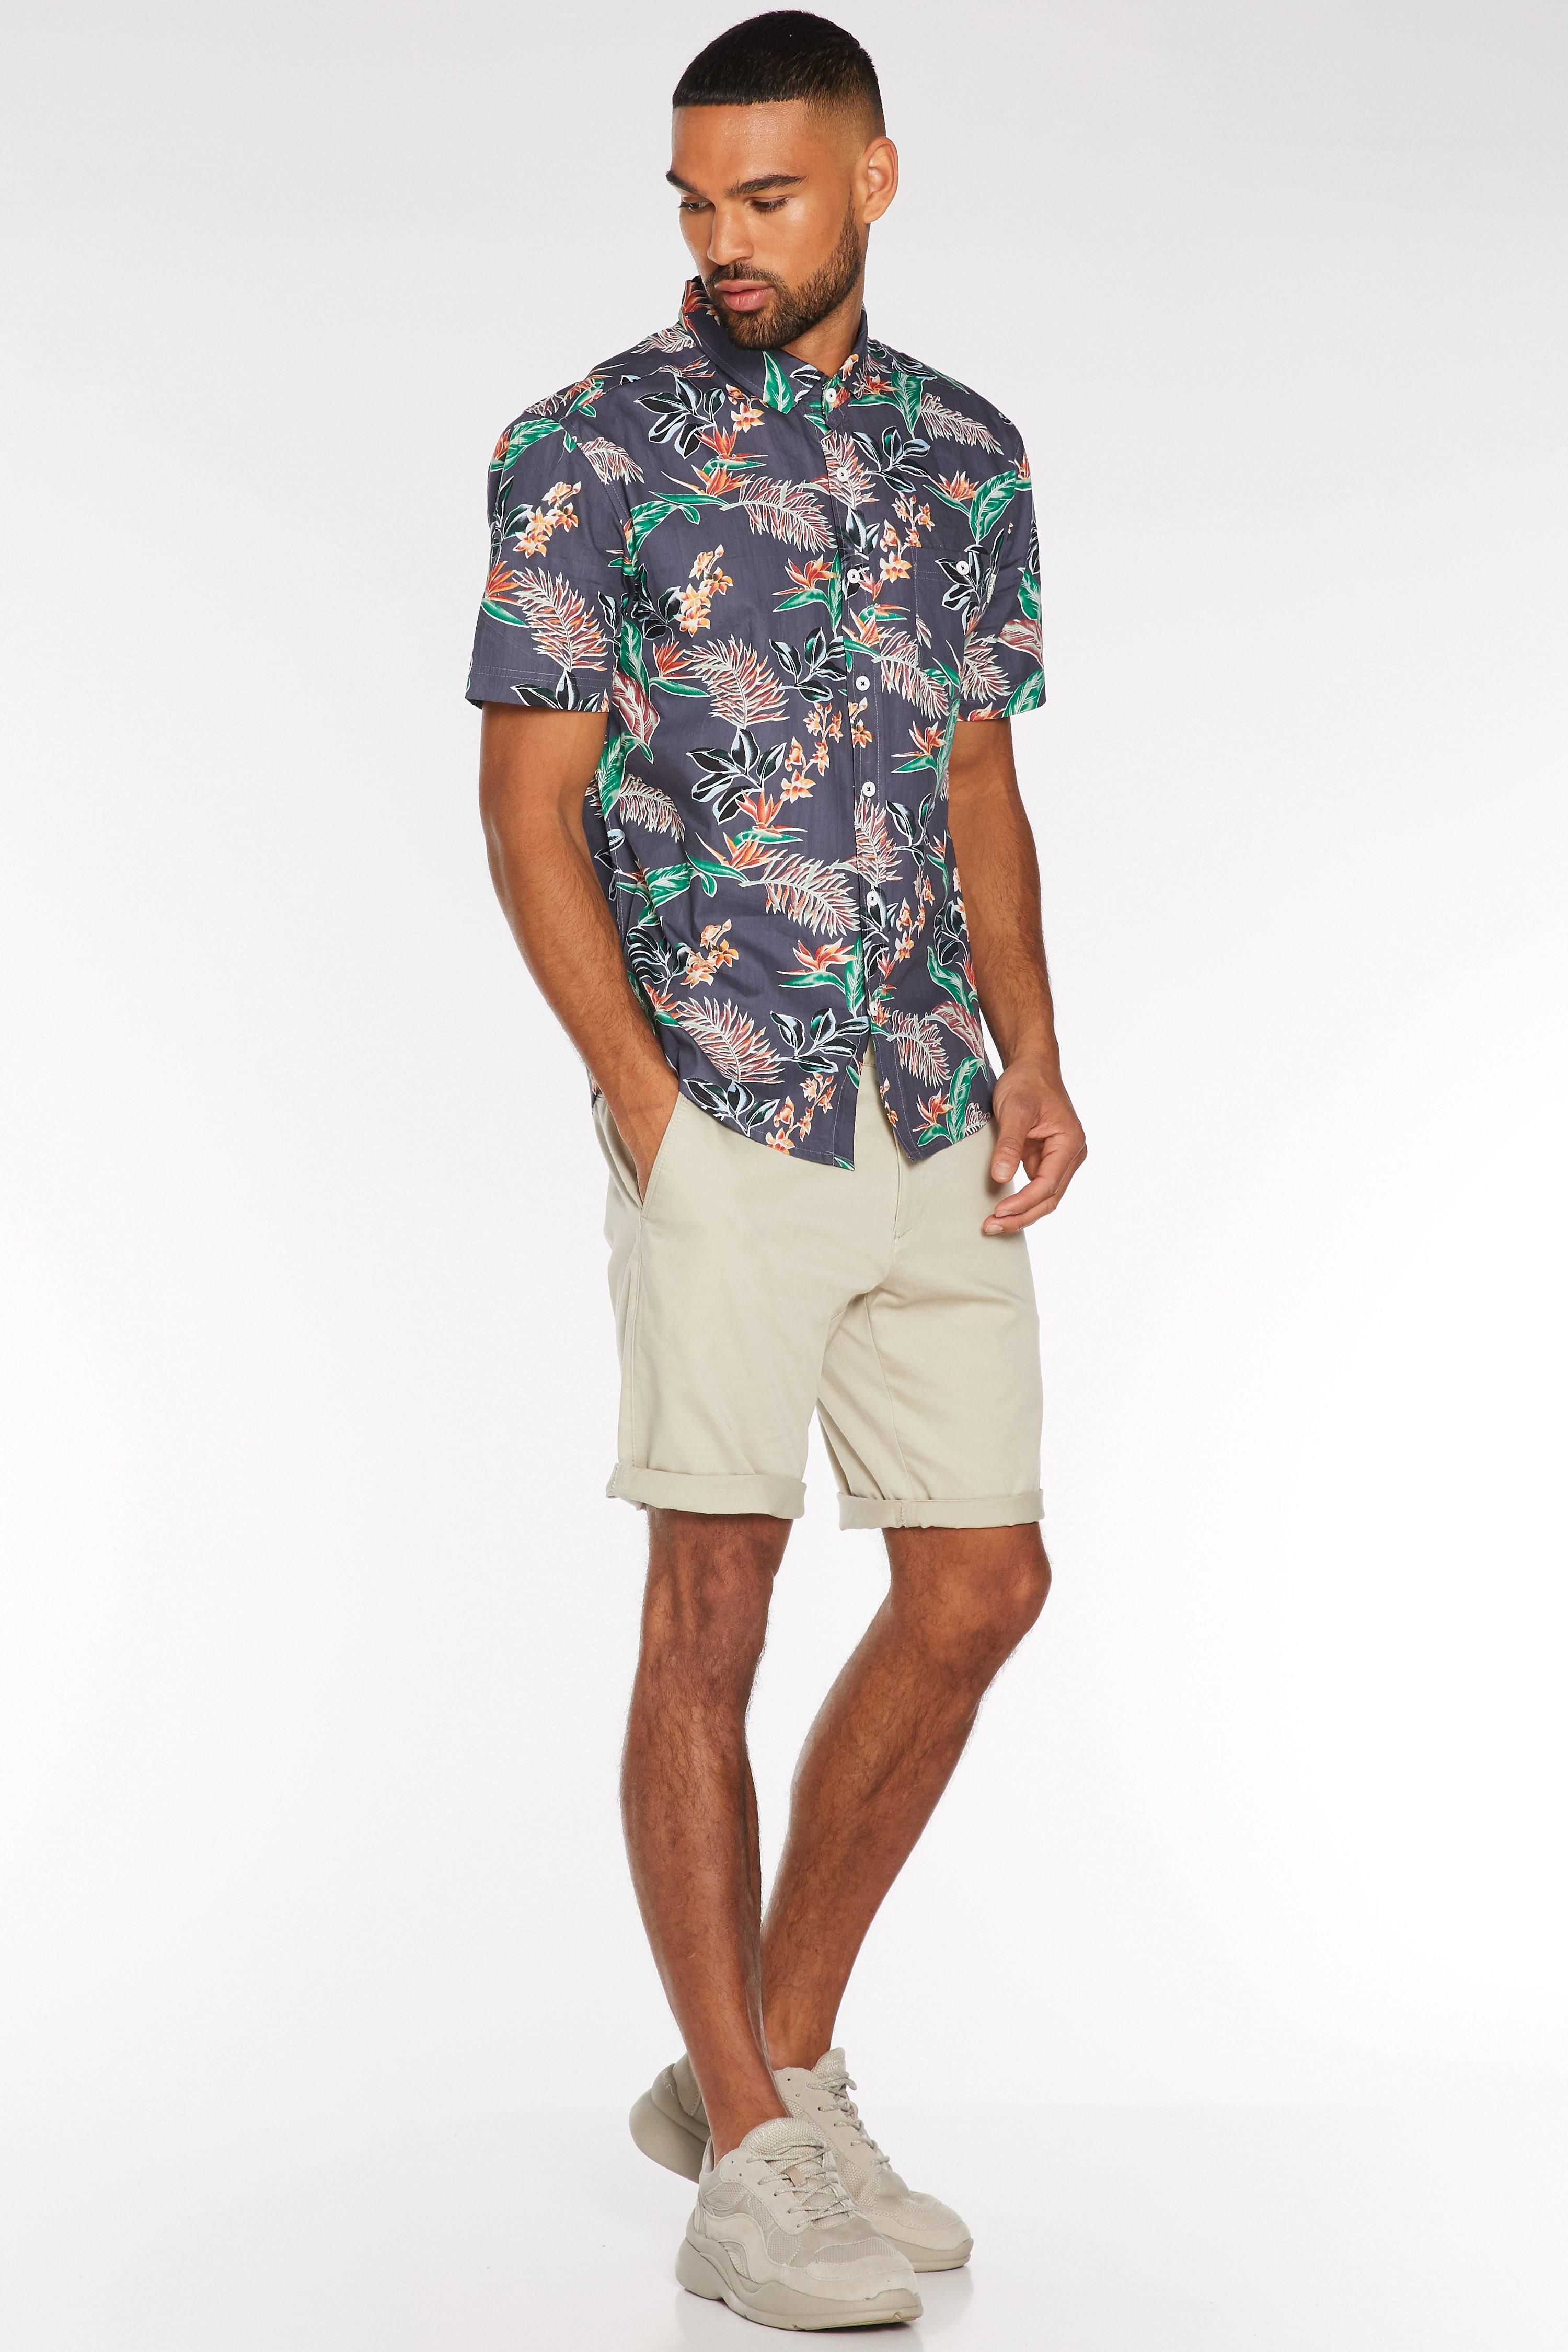 Floral Print  	Short Sleeves  	Button Through Fastening  	Chest Pocket with Button